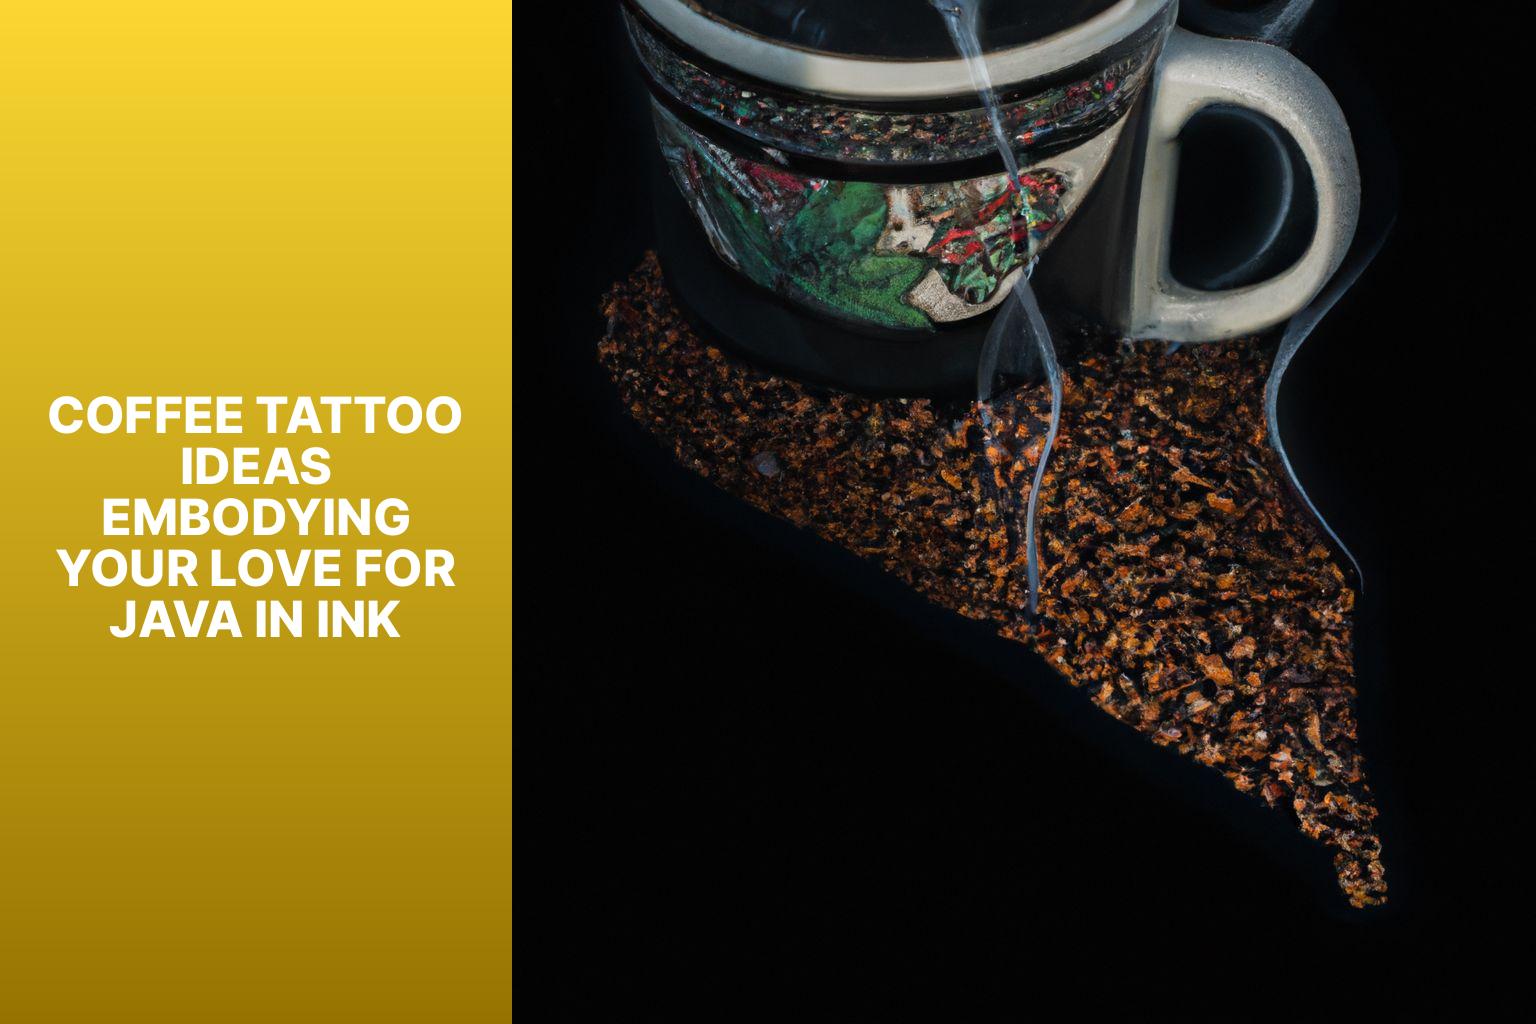 Coffee Tattoo Ideas: Embodying Your Love for Java in Ink